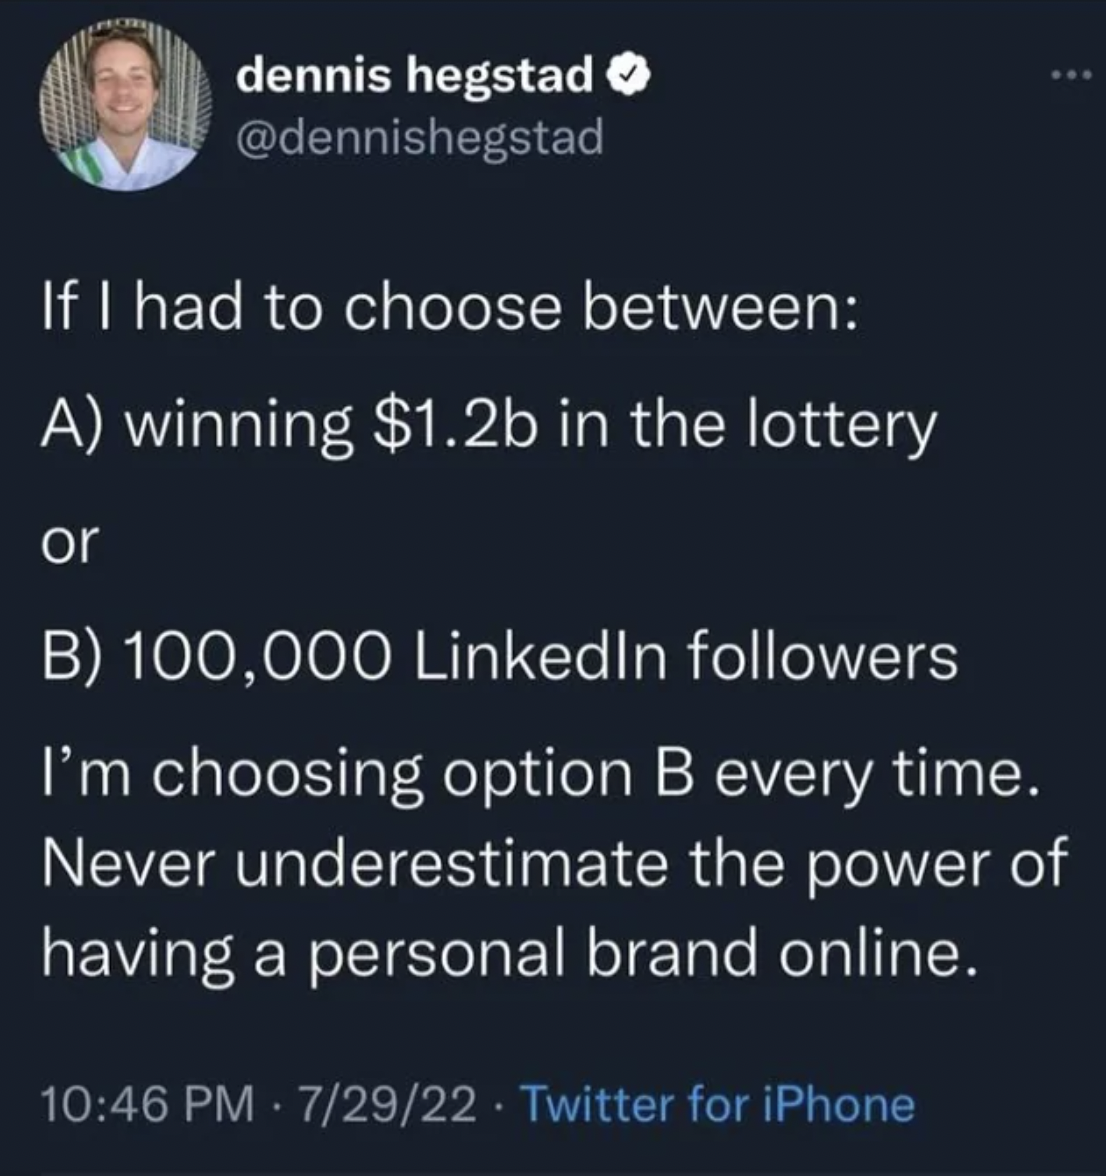 facepalms atmosphere -  If I had to choose between A winning $1.2b in the lottery or B 100,000 LinkedIn ers I'm choosing option B every time. Never underestimate the power of having a personal brand online.